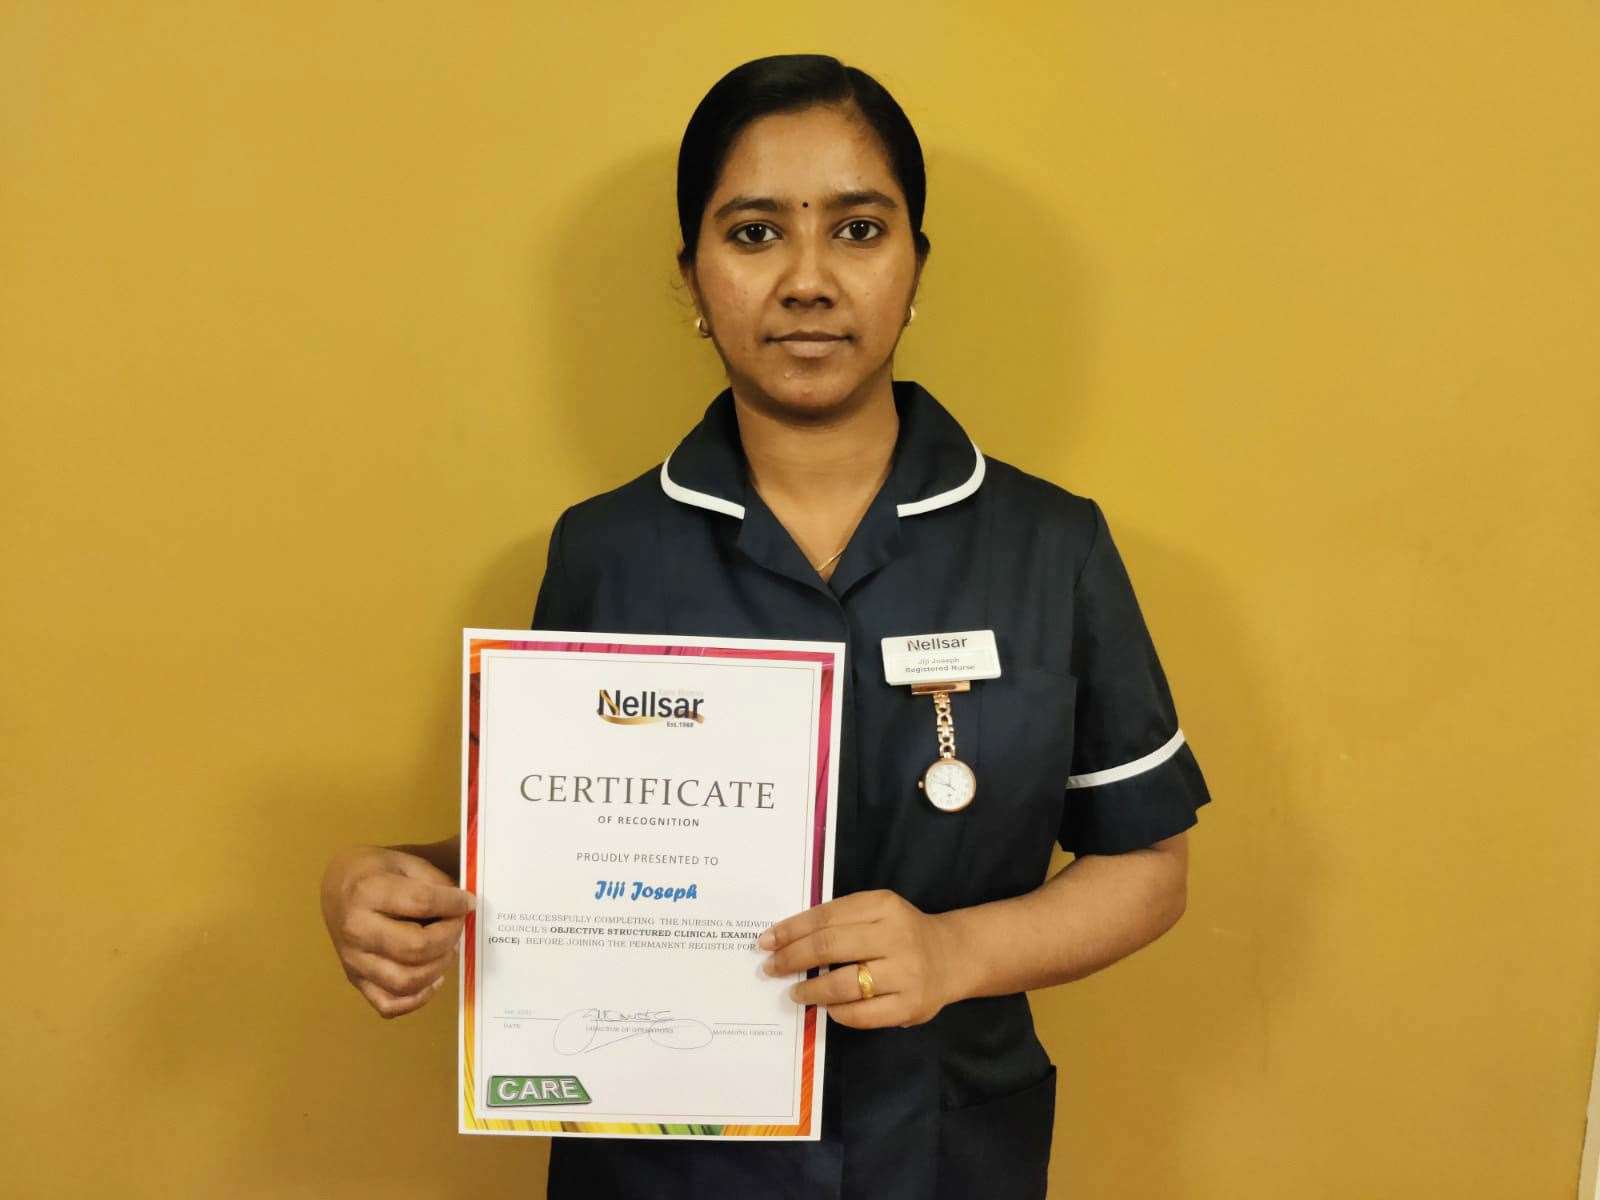 Jiji Joseph is one of the nurses from India helping at the Hengist Field Care Centre in Borden, Sittingbourne